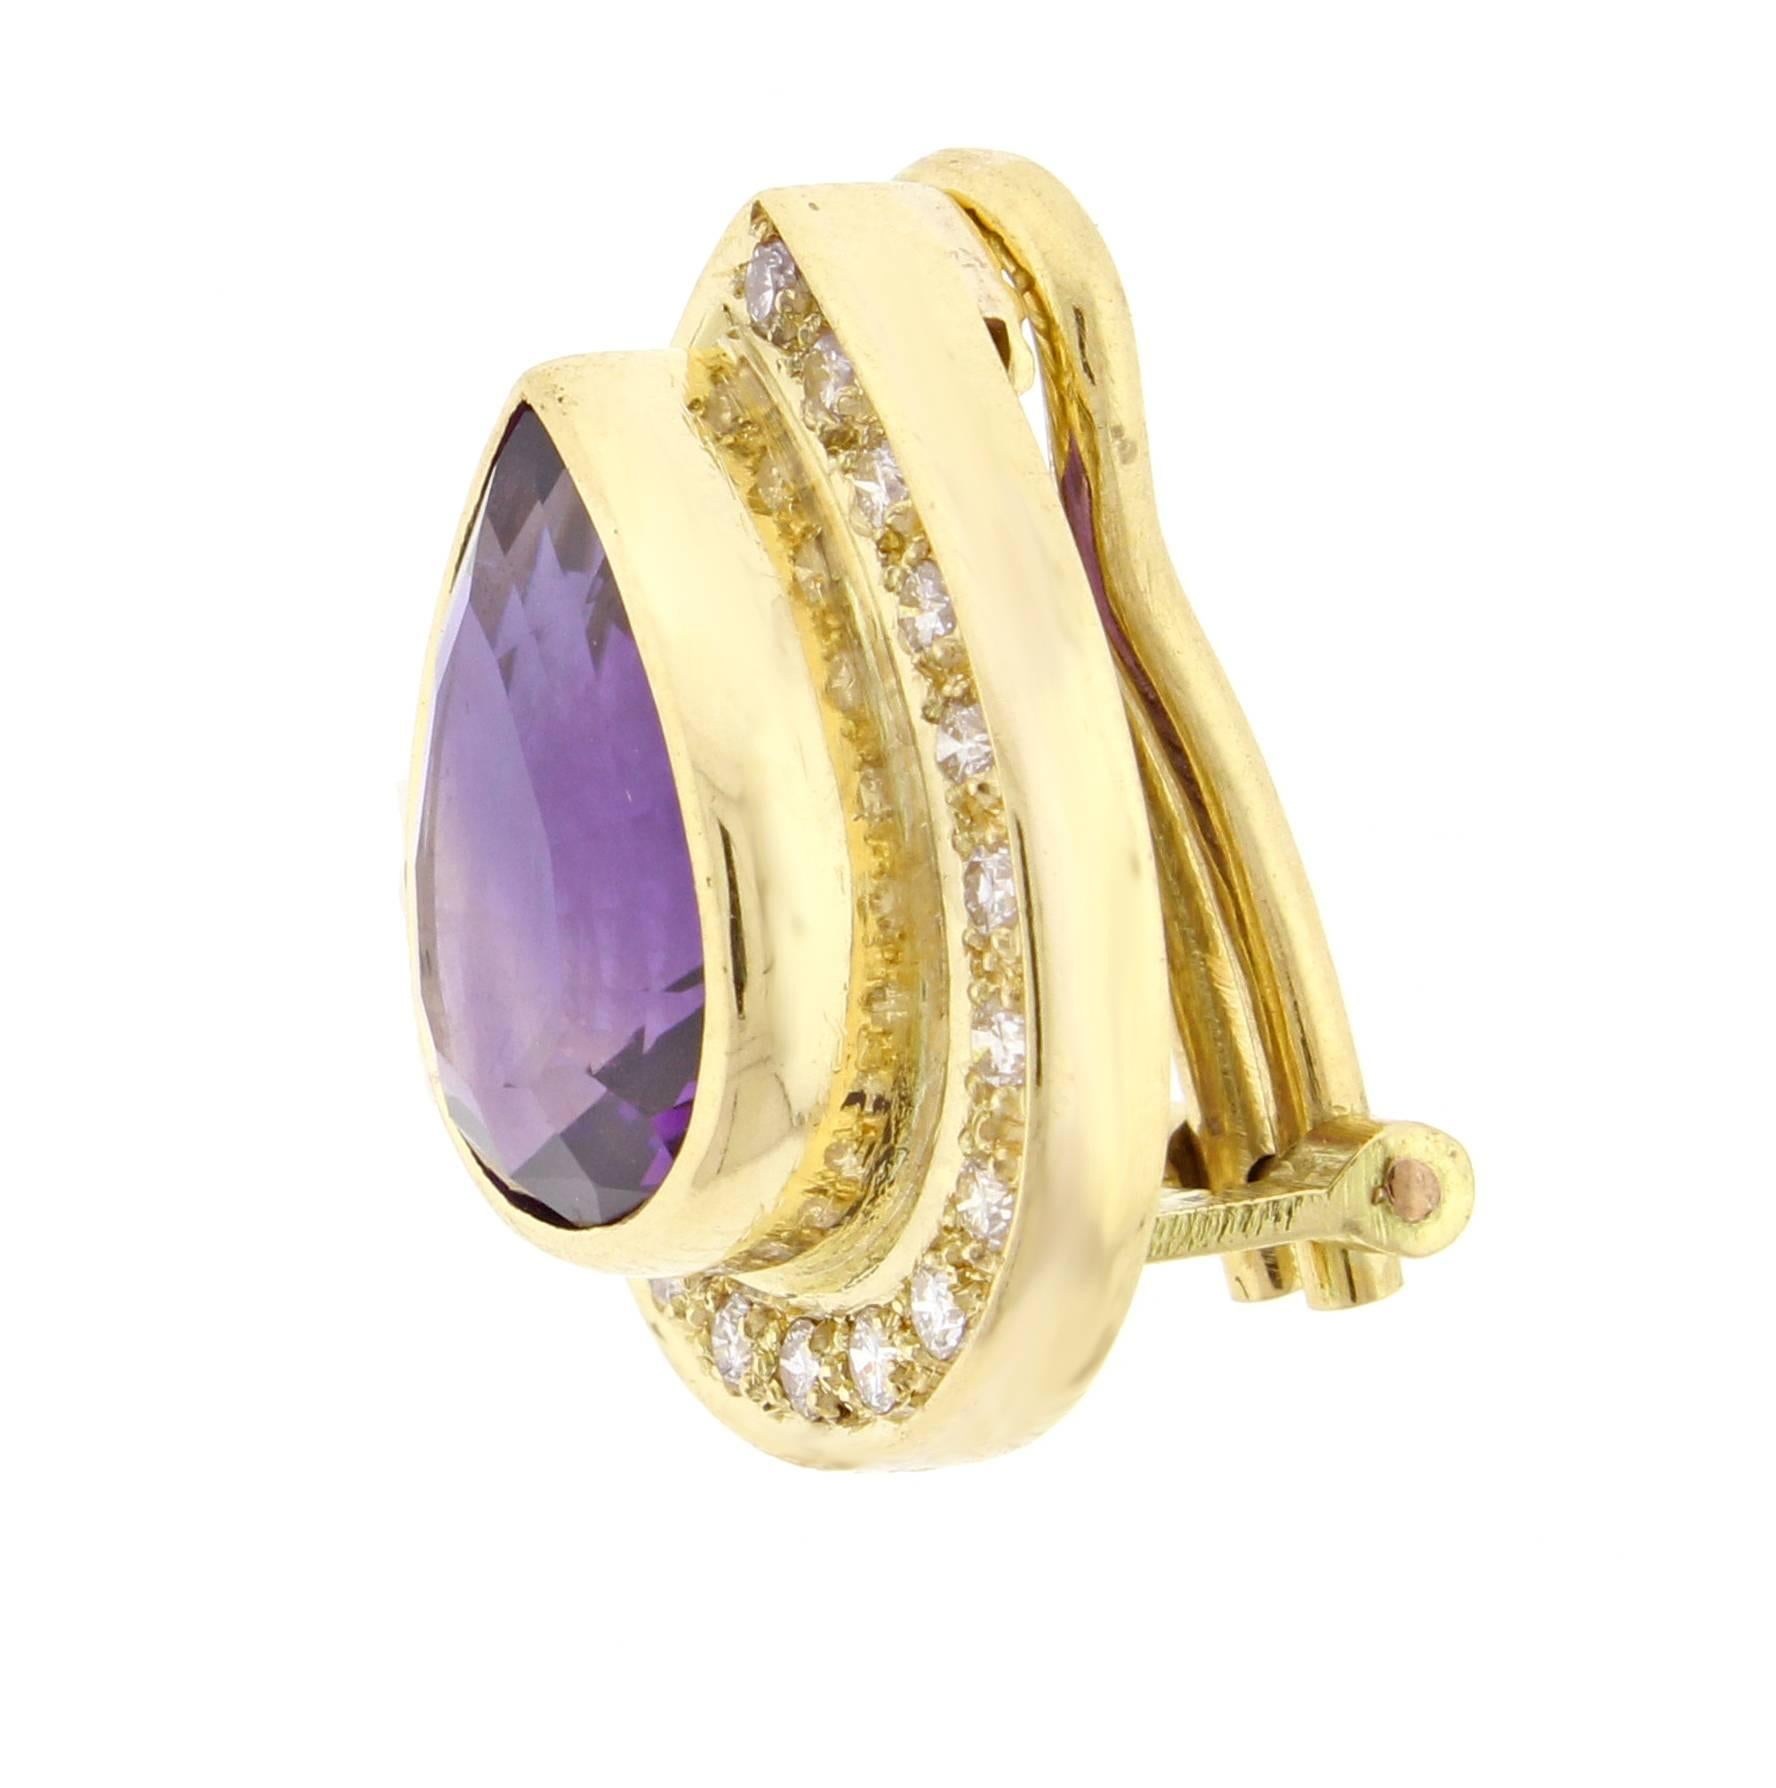 Pear-shape and diamond Earrings by world renowned Brazilian jeweler Haroldo Burle Marx (1911-1991). The ring features  bezel 12*10mm pear-shaped amethysts and 28 diamonds weighing approximately .55 carats set in a brushed 18 karat gold setting.